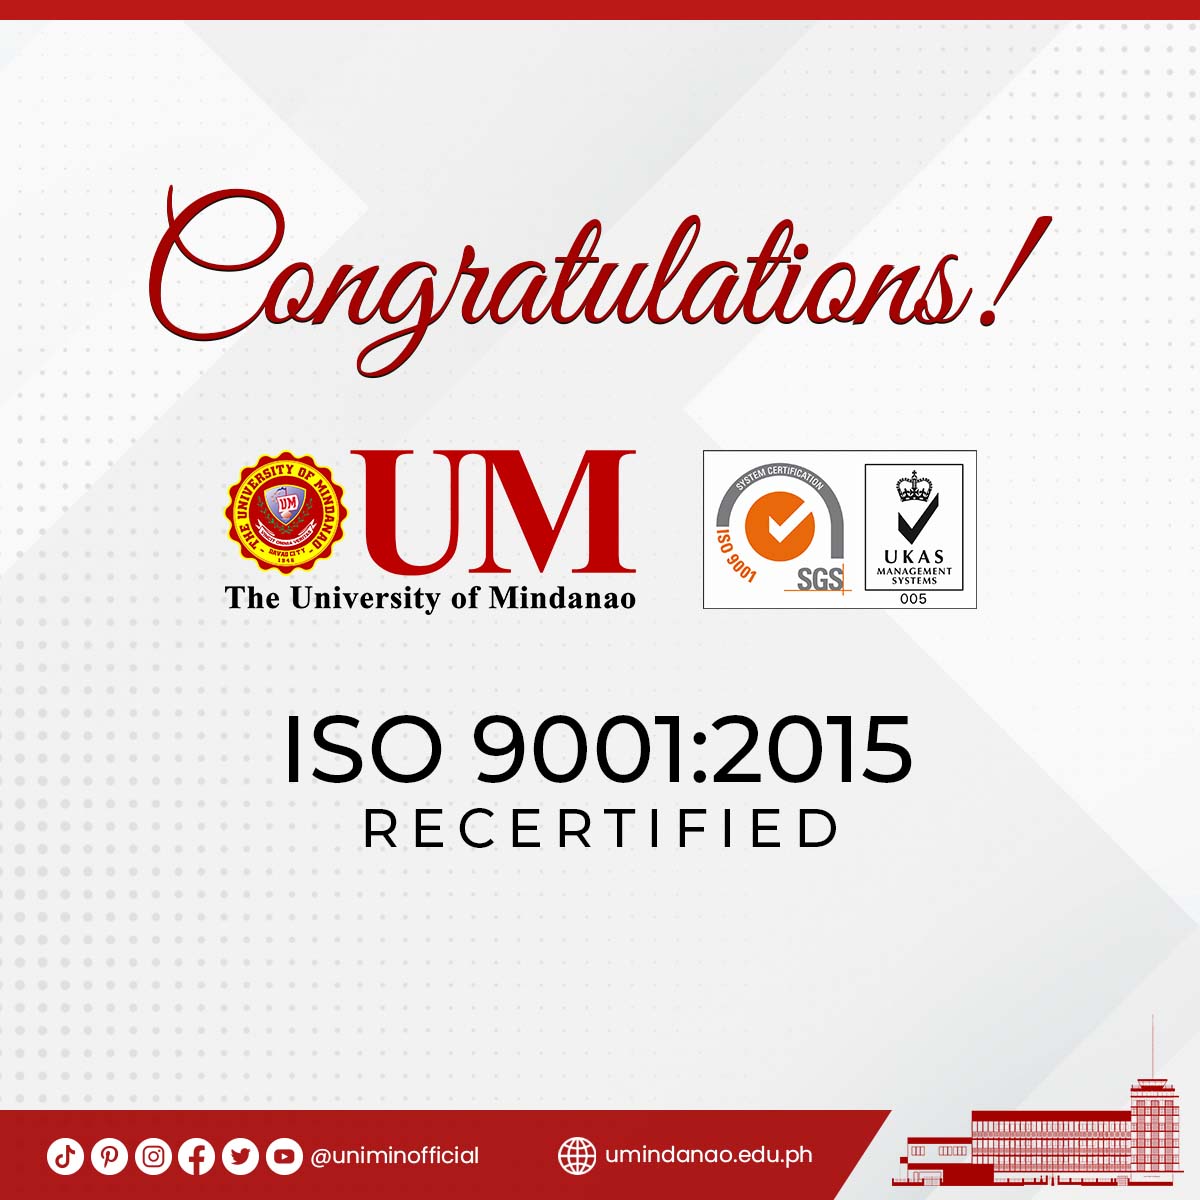 UM is granted ISO 9001:2015 recertification